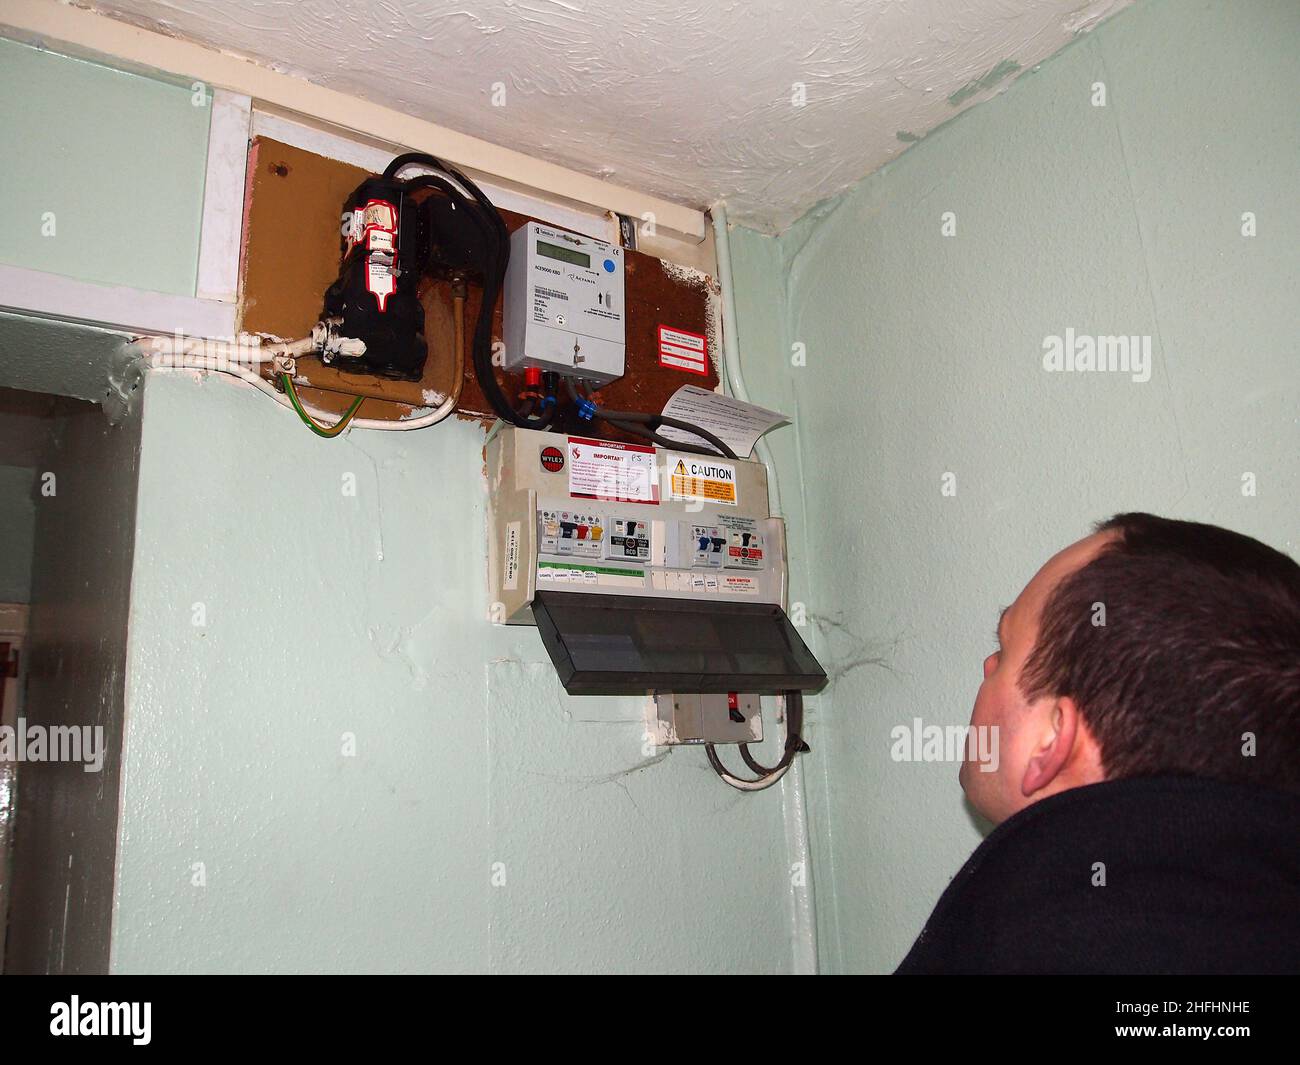 January 2013 - Poor quality electrical installation is an old block of flats and apartments Stock Photo